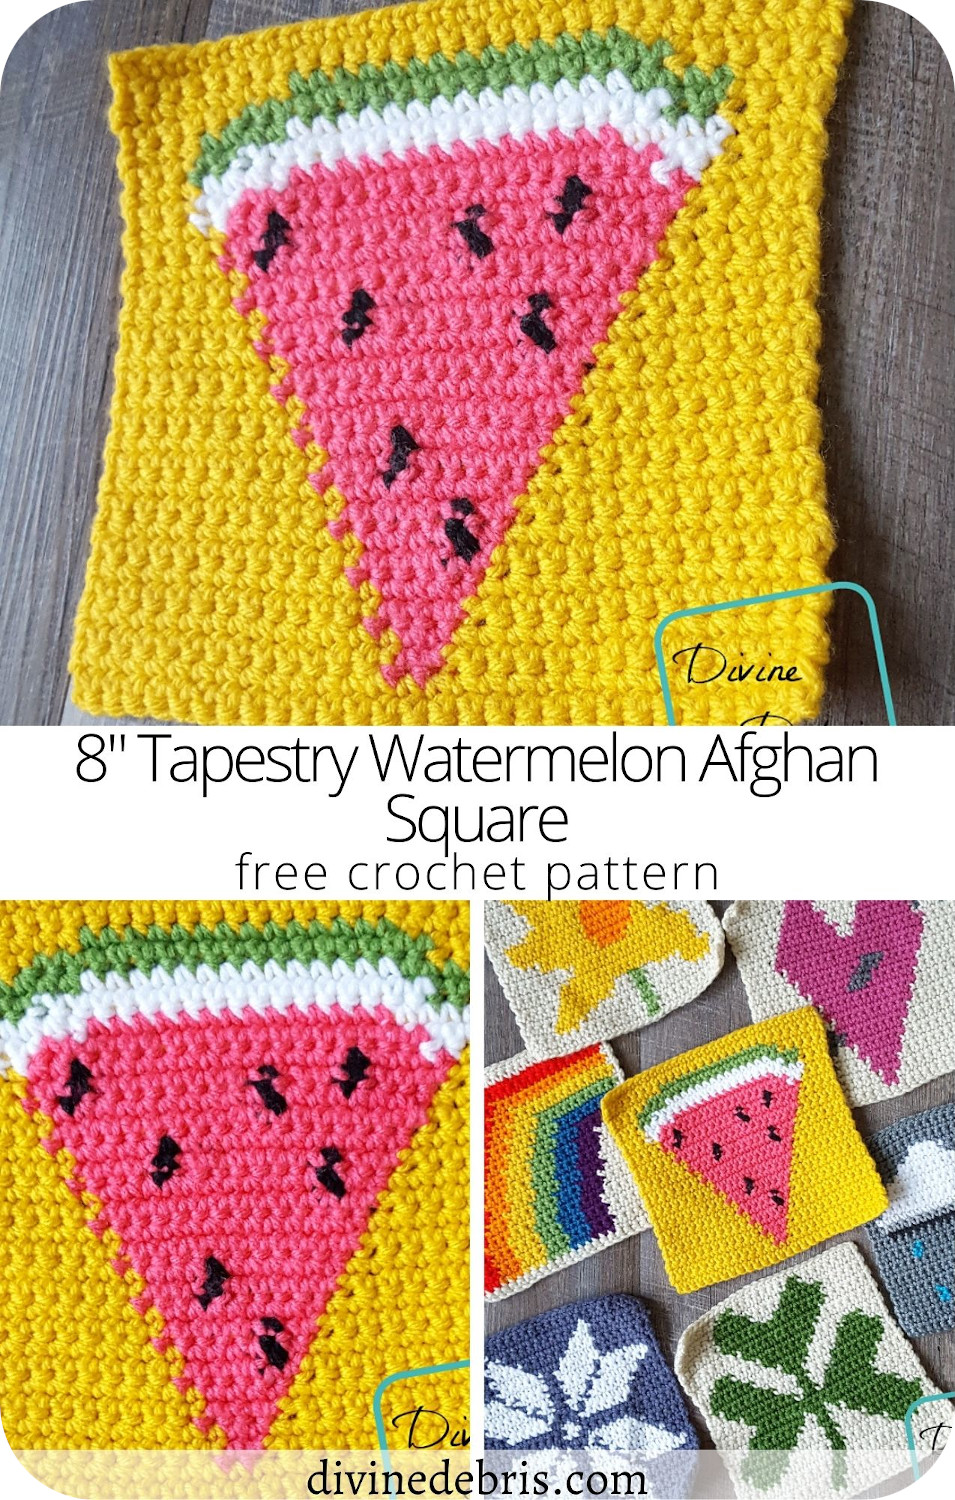 Learn to make the 8" Tapestry Watermelon Afghan Square, part of the 2018 free tapestry crochet CAL, free on DivineDebris.com